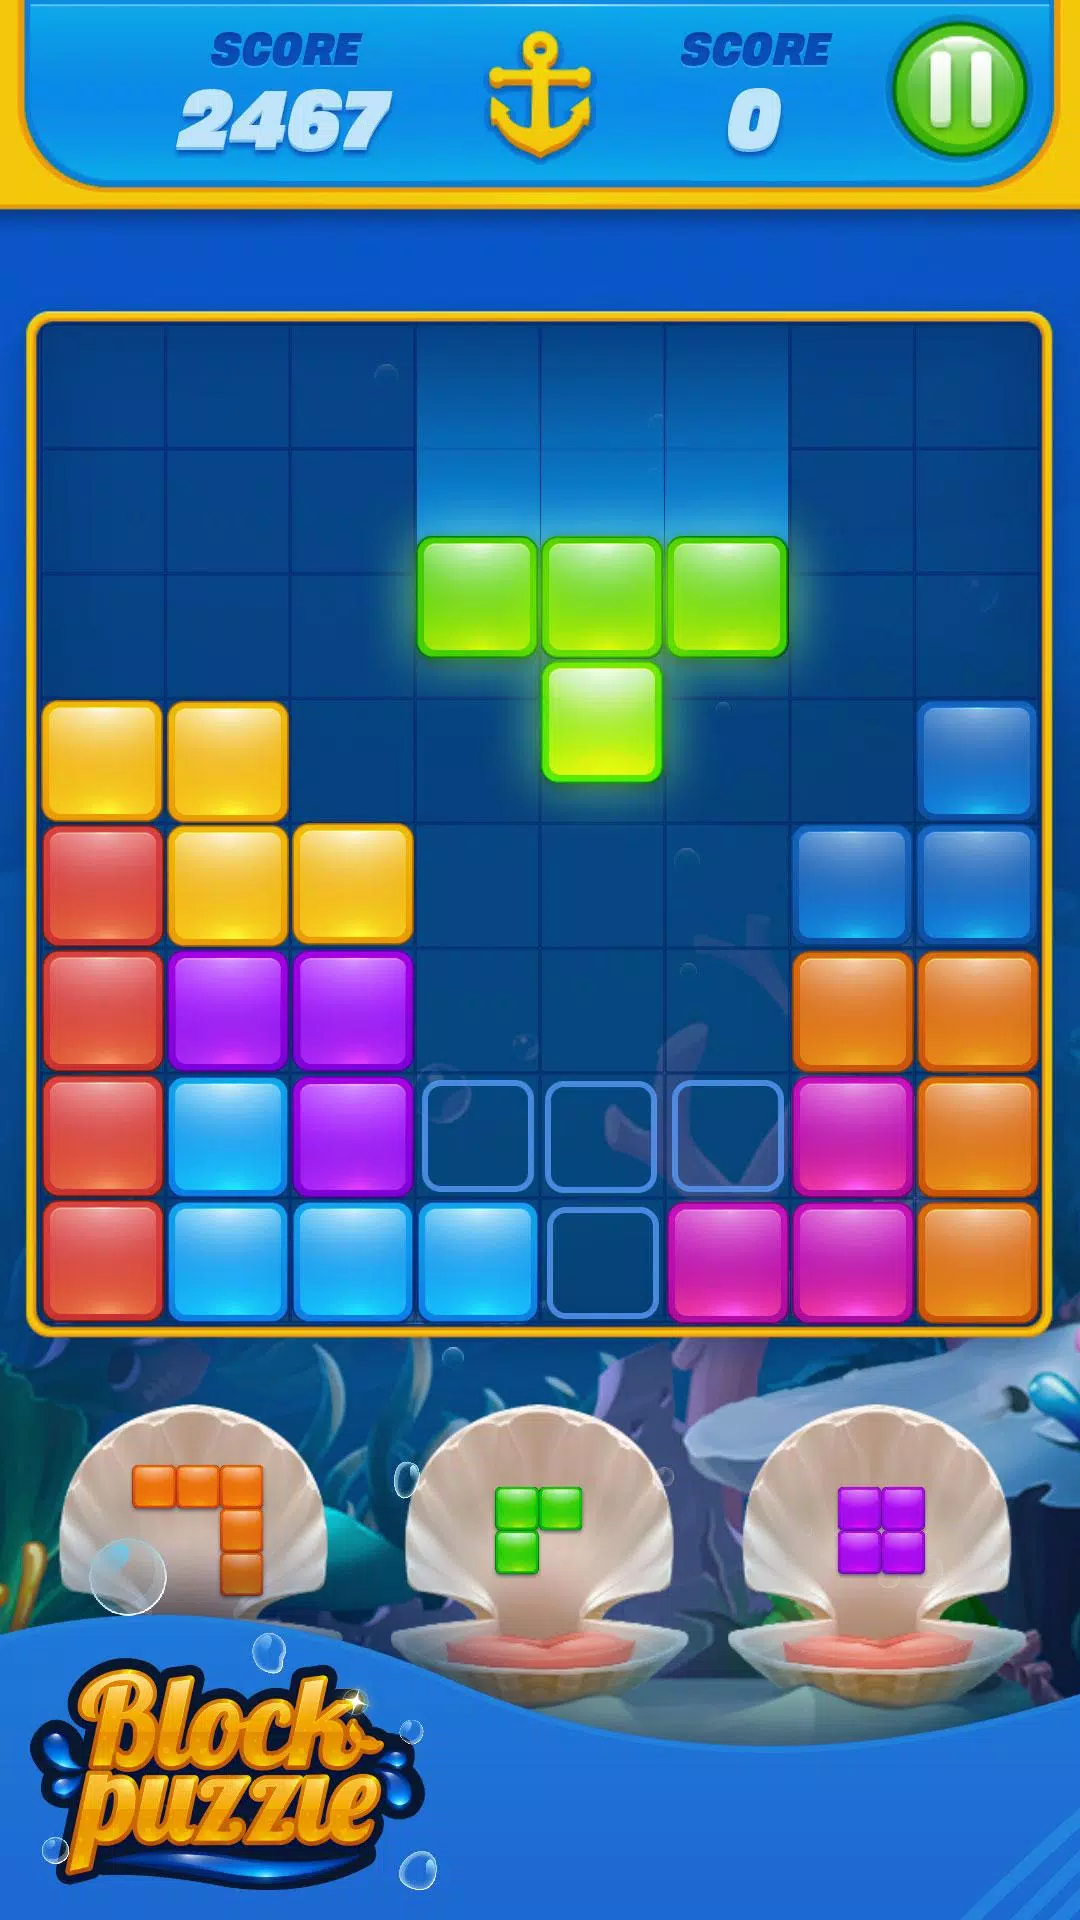 Ocean Block Puzzle for Android - APK Download